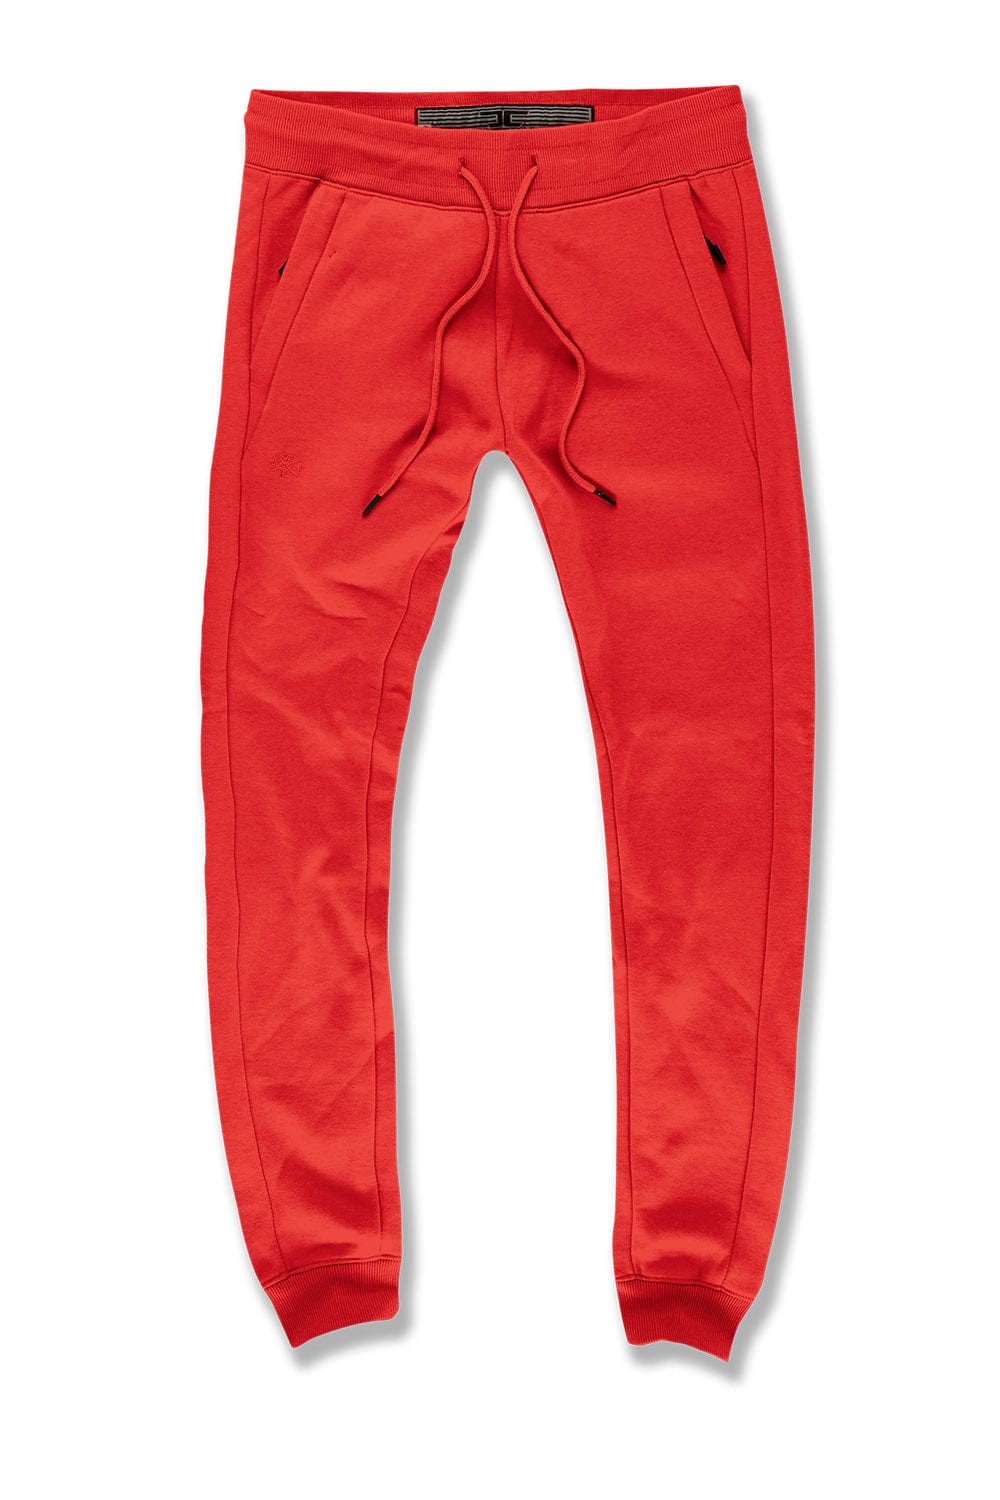 New Men's Jordan Craig Uptown Stacked Sweatpants Red Size X-Small